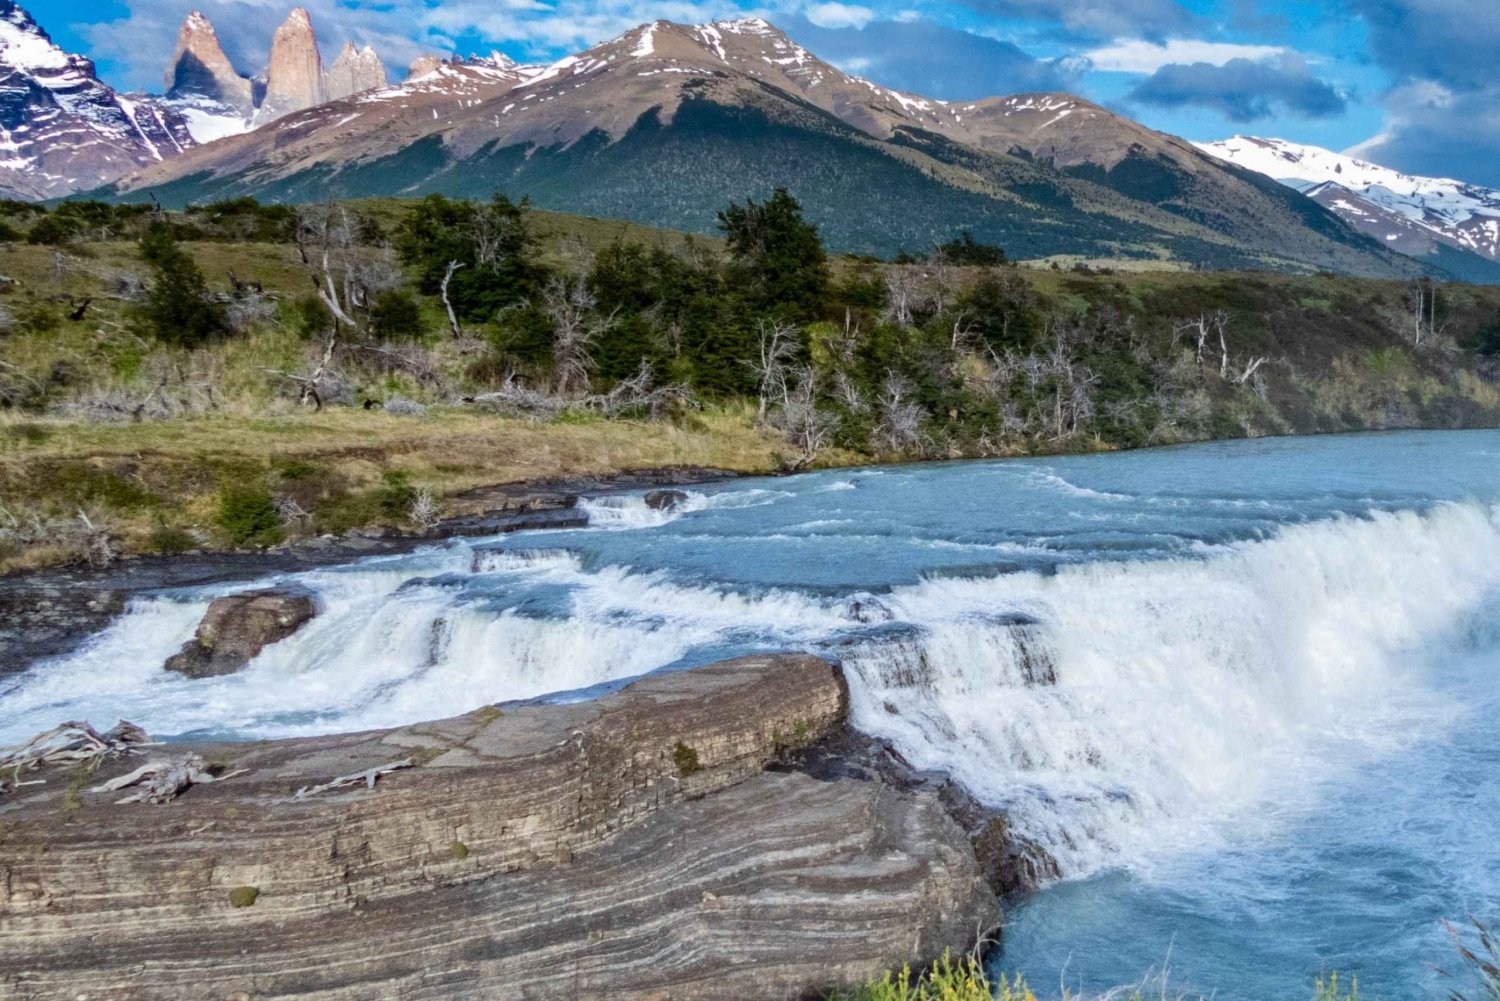 Puerto Natales: Torres del Paine Lookout Hike Self-Guided